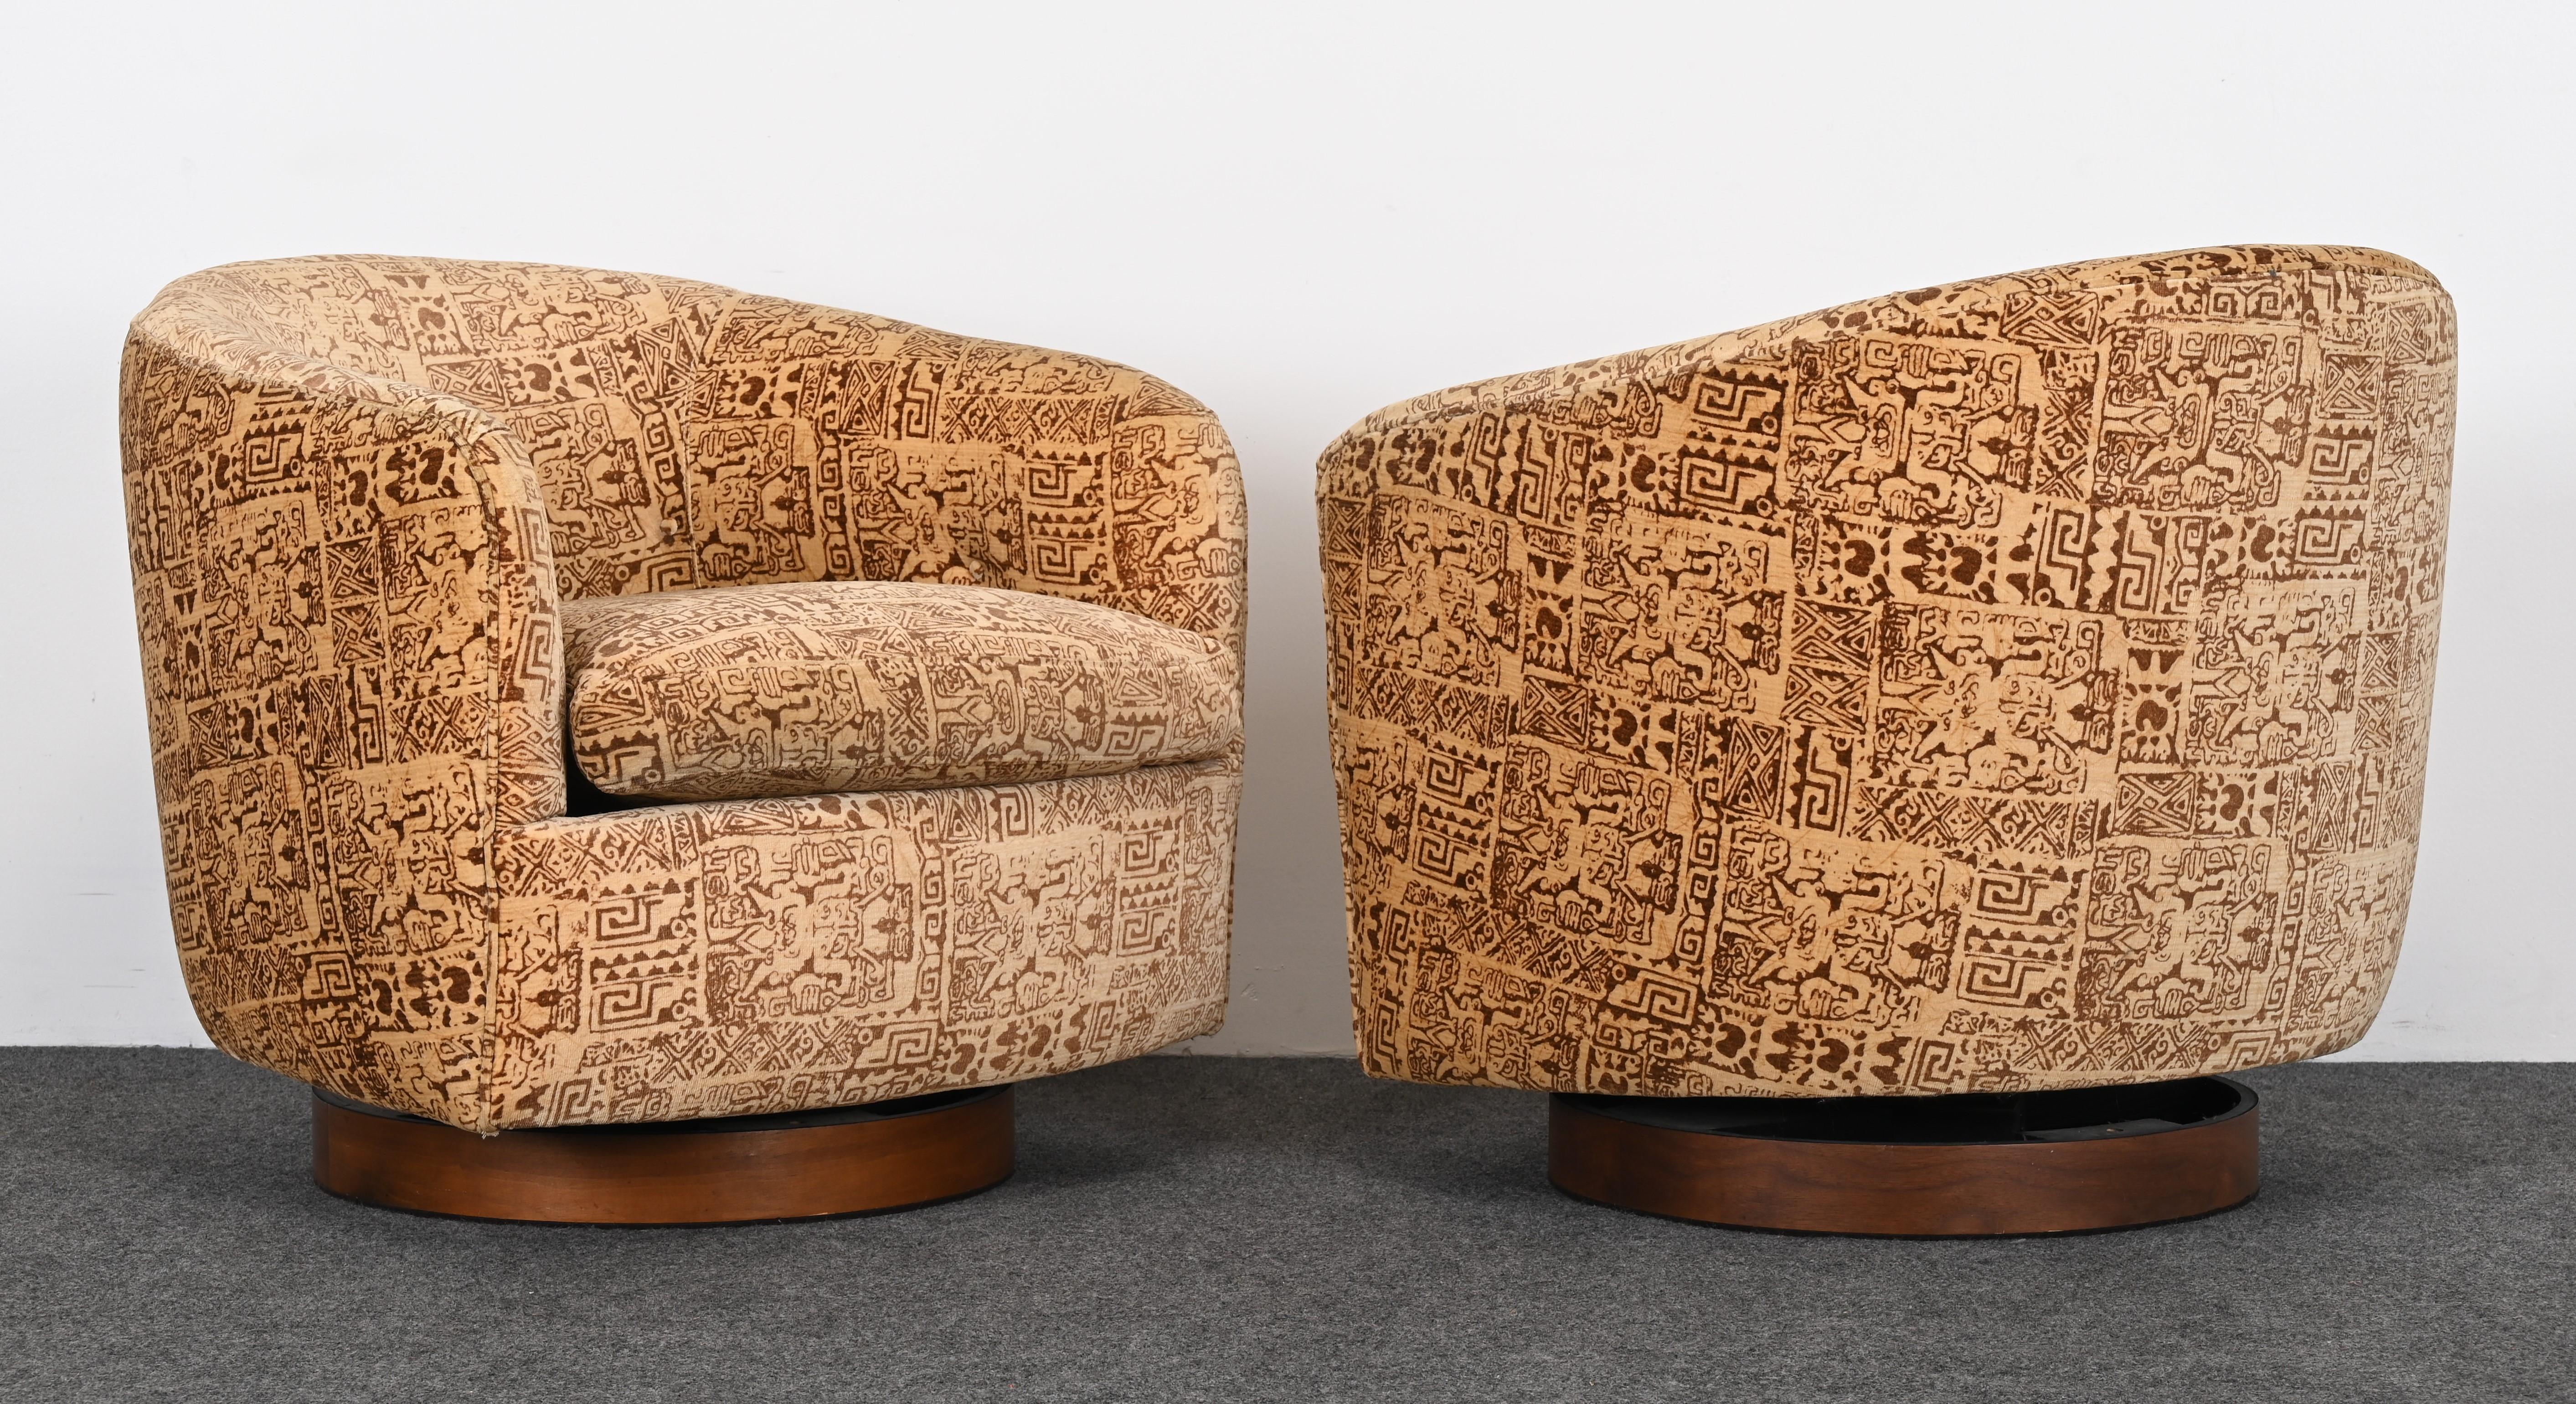 A pair of luxurious plush velvet chairs by Milo Baughman for Thayer Coggin, 1979. The batik fabric is original and has some minor fading. The overall look of the chairs is very pleasing and ready to place. Both chairs rock and swivel. The original